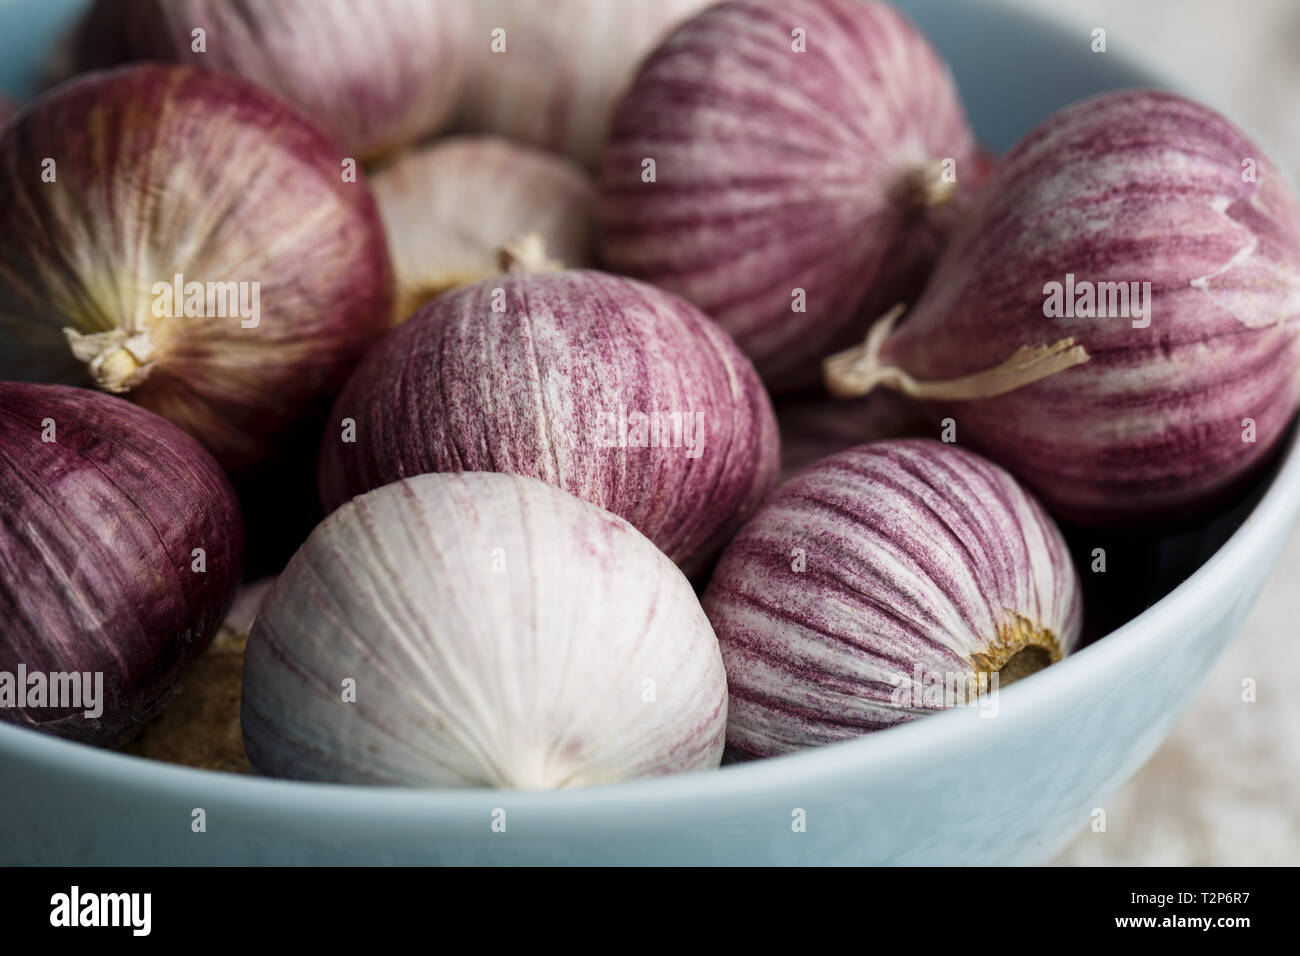 Whole Bulbs of Chinese Garlic in blue bowl Stock Photo